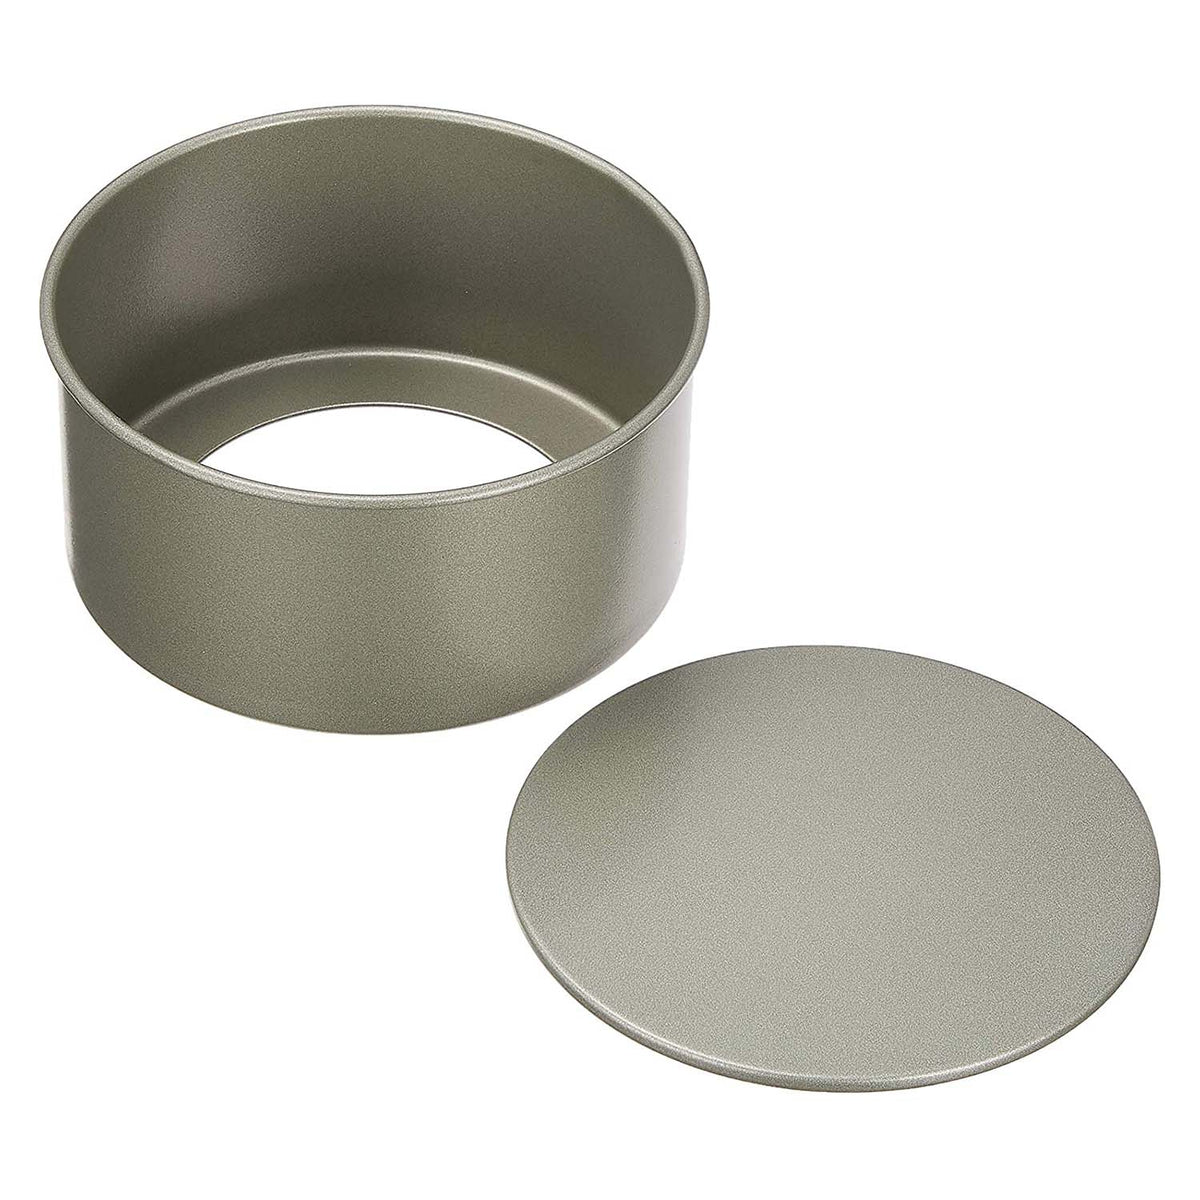 FUJIHORO Steel Round Cake Pan with Removable Bottom